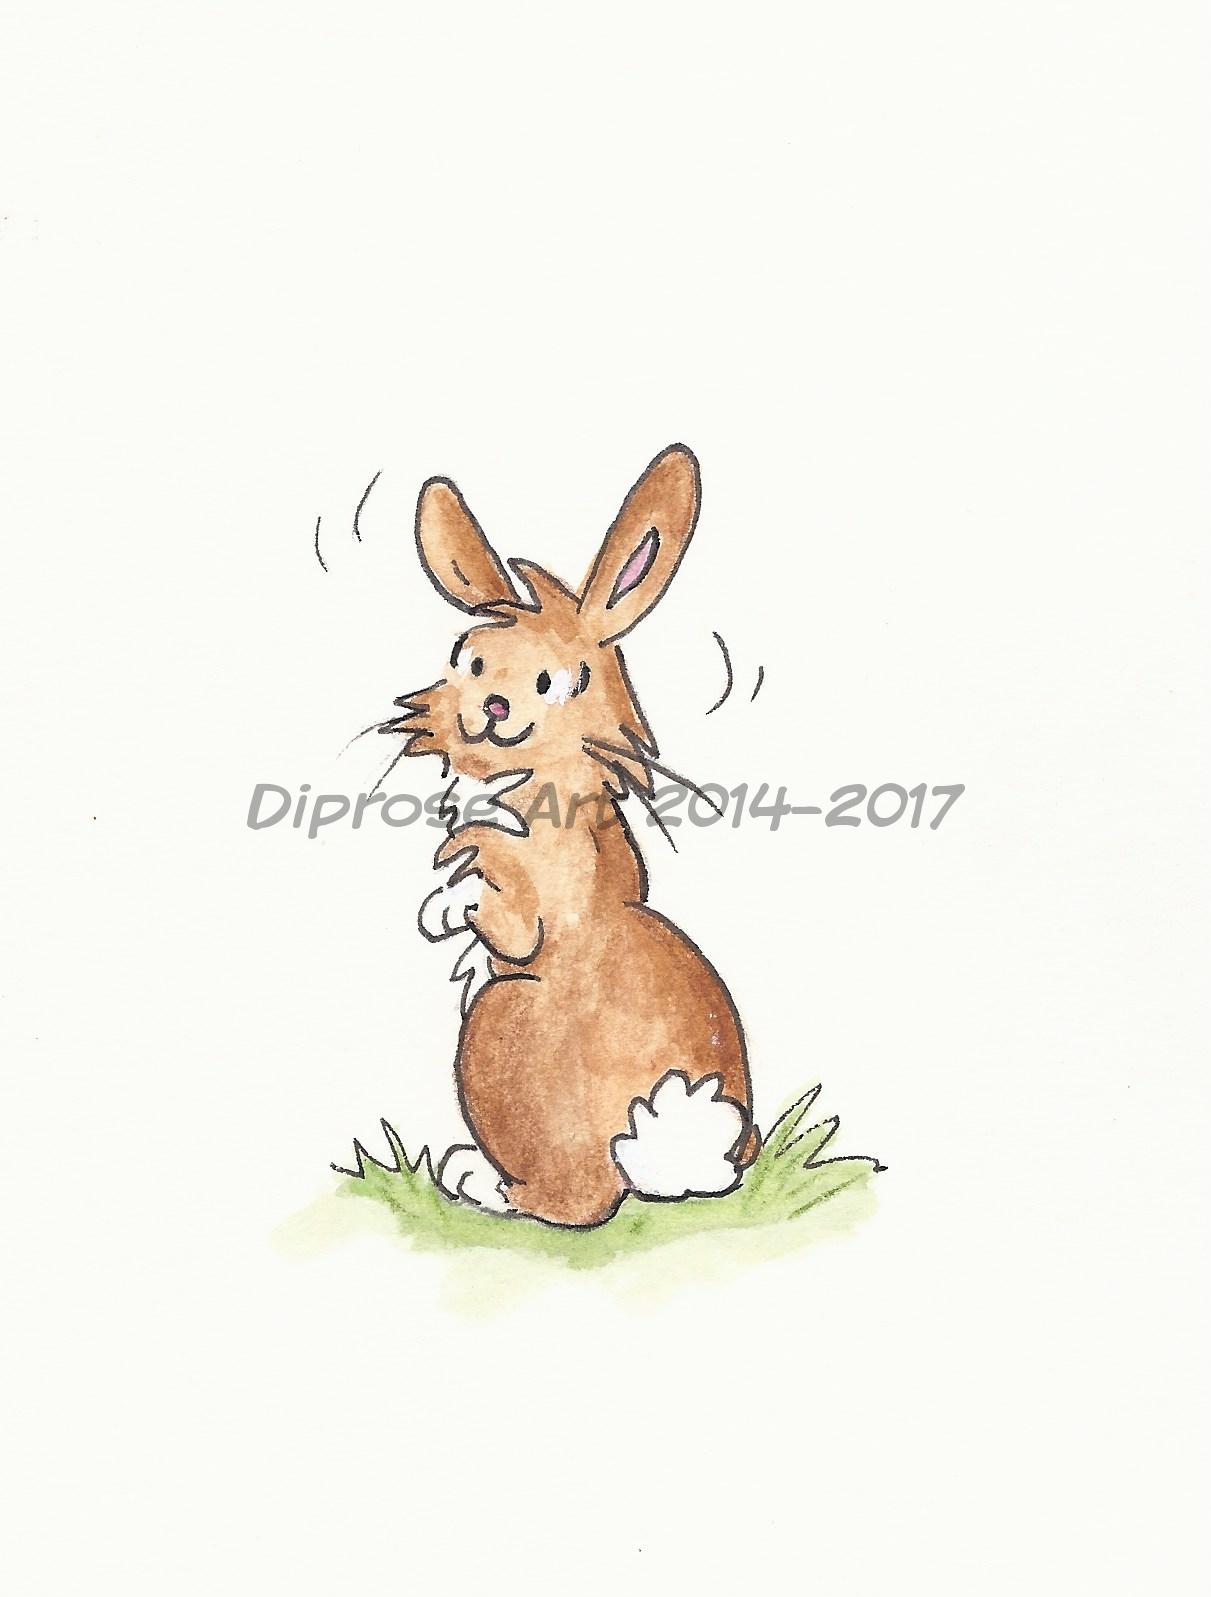 Cartoons done to illustrate a veterinary brochure - this is the basic bunny!